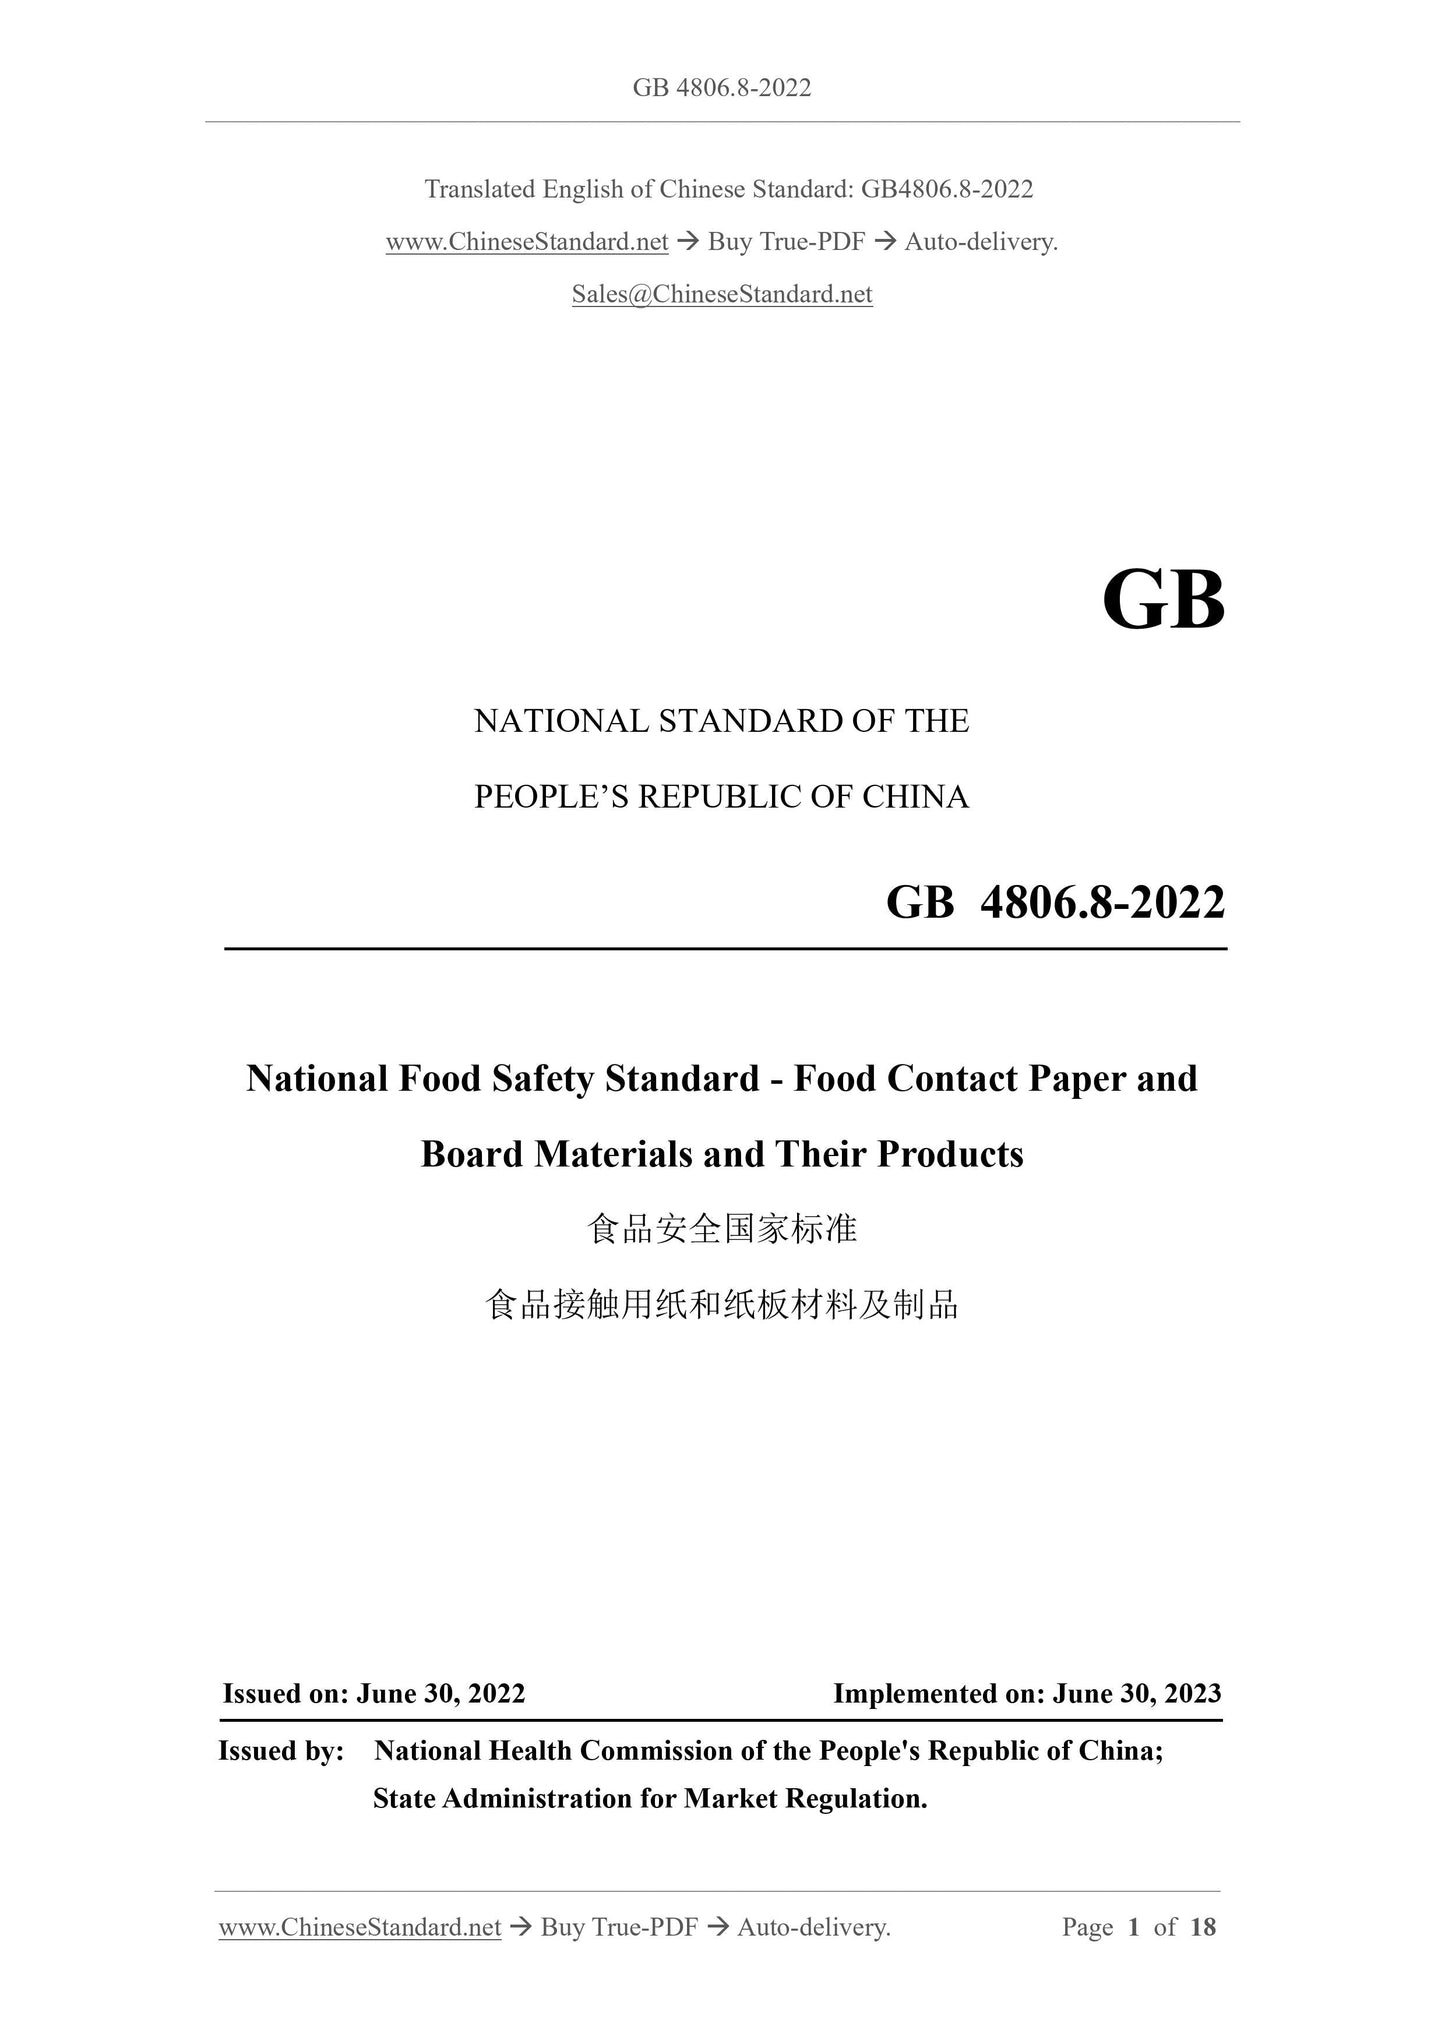 GB 4806.8-2022 Page 1